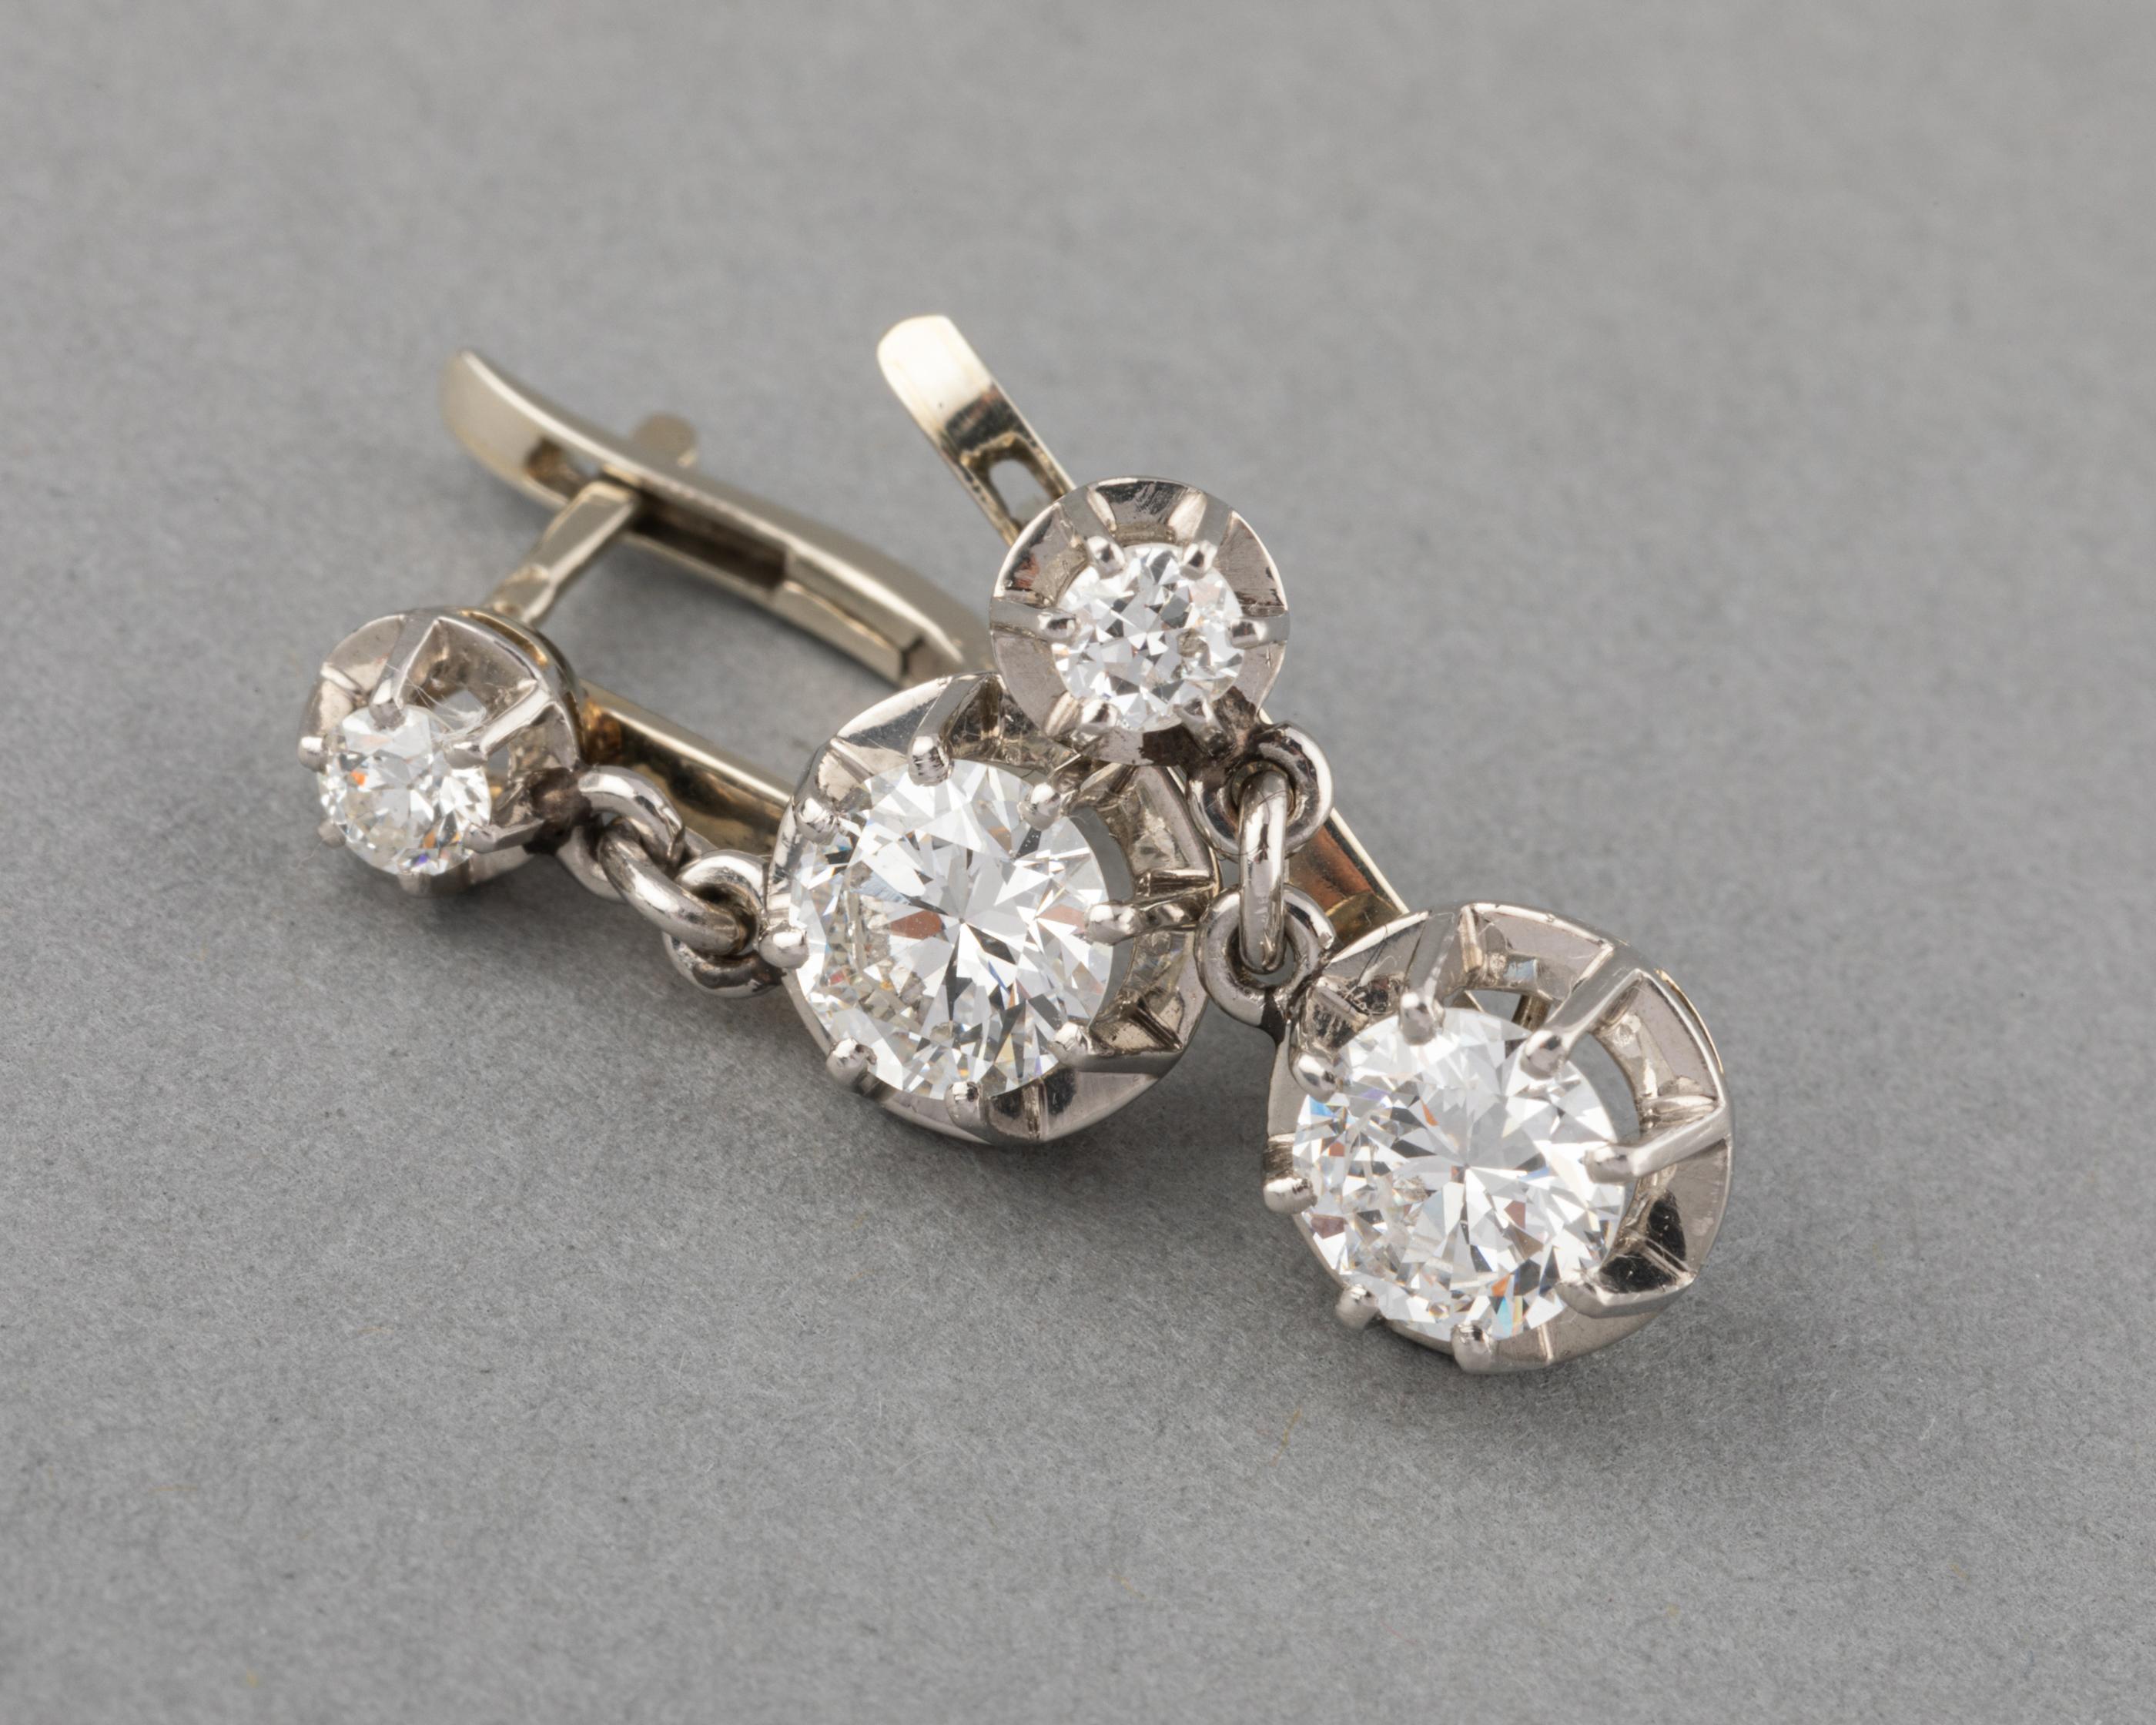 Very beautiful pair of earrings, made in France circa 1930.
The two principal diamonds weights 0.70 carats each, they are good quality, white and clear. Transitionnal cut, nearly modern. The other little diamonds weights 0.10 carats each.
Made in